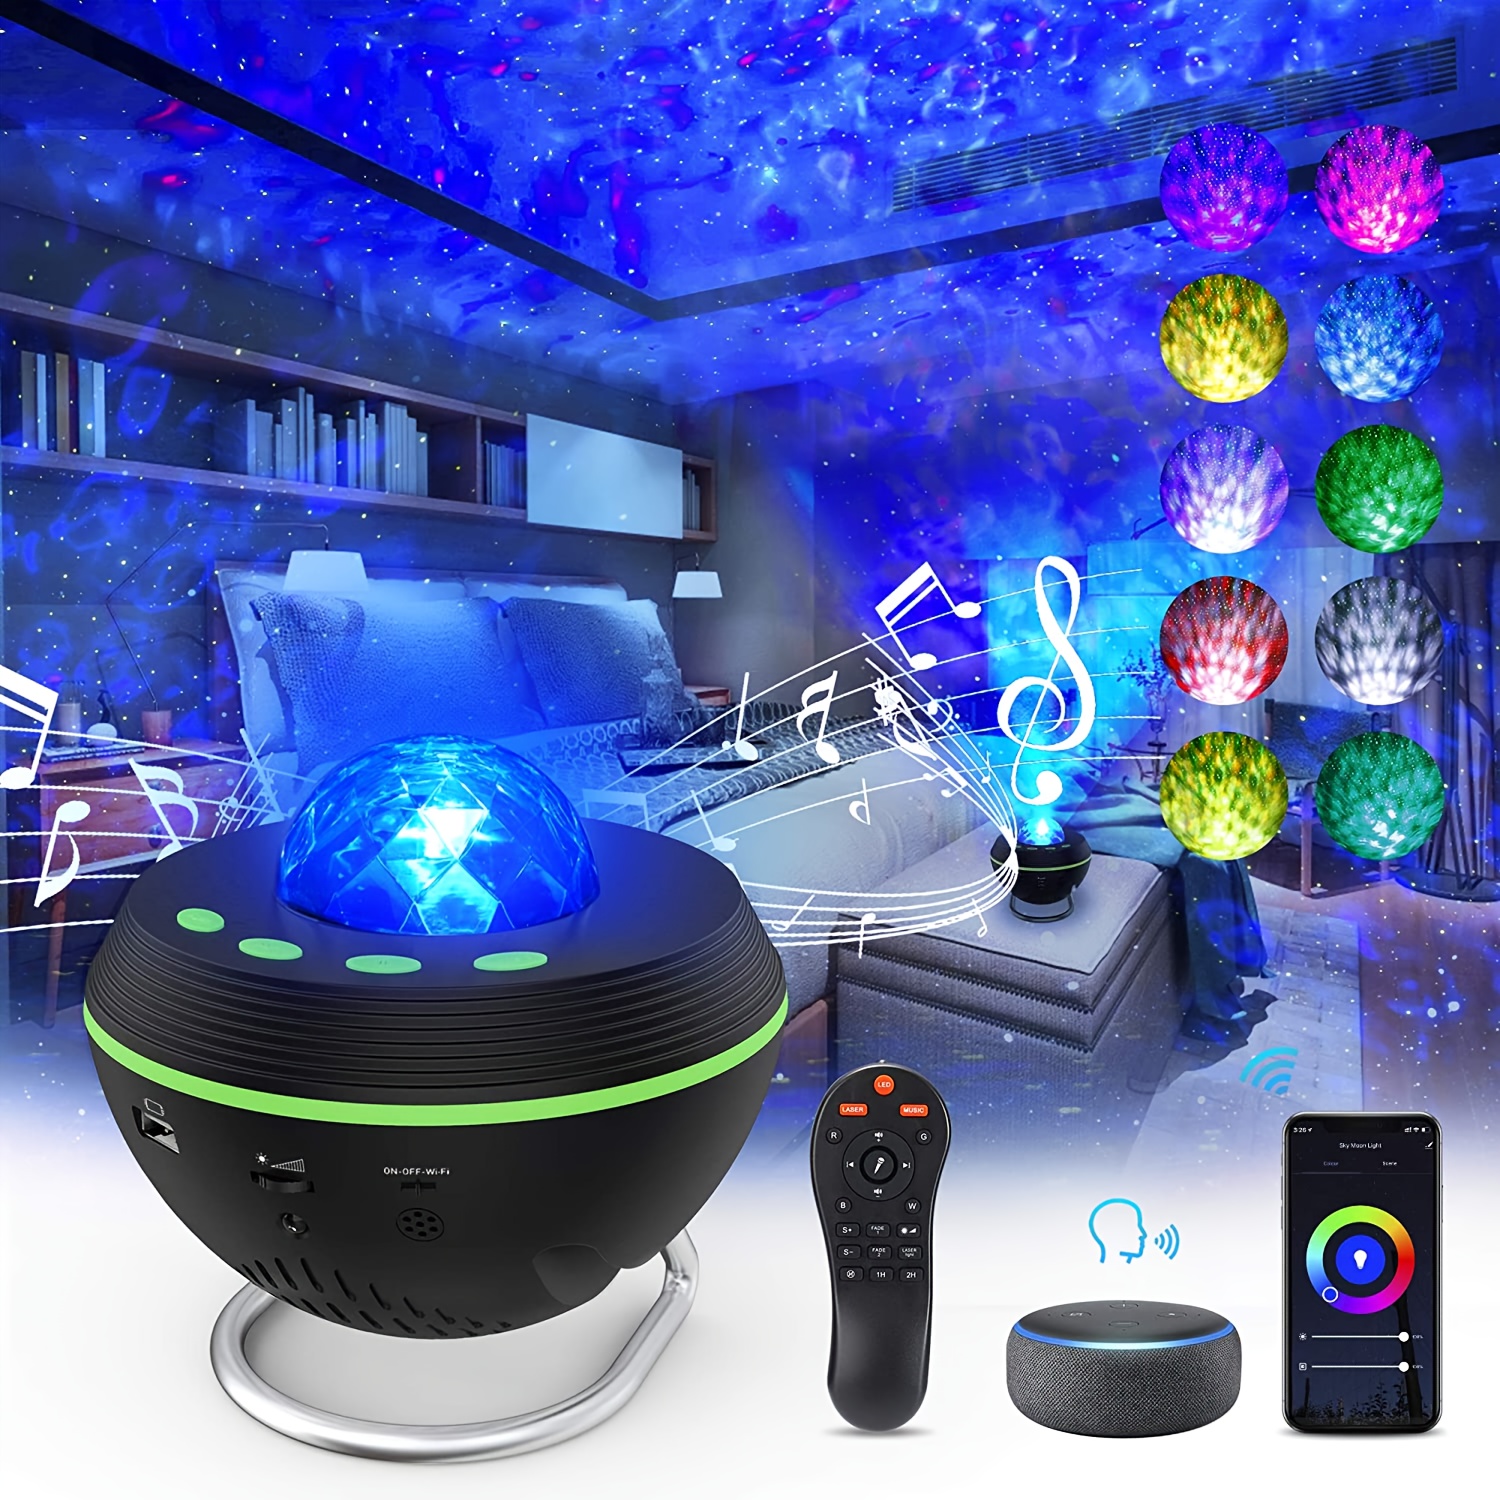 

1pc Star Projector & Night Light Projector, Galaxy Light Projector For Bedroom, Starry Light Projector With Smart App & Alexa, 10 Lighting Modes, Bt, Remote, Sound-activated And Auto-off Timer